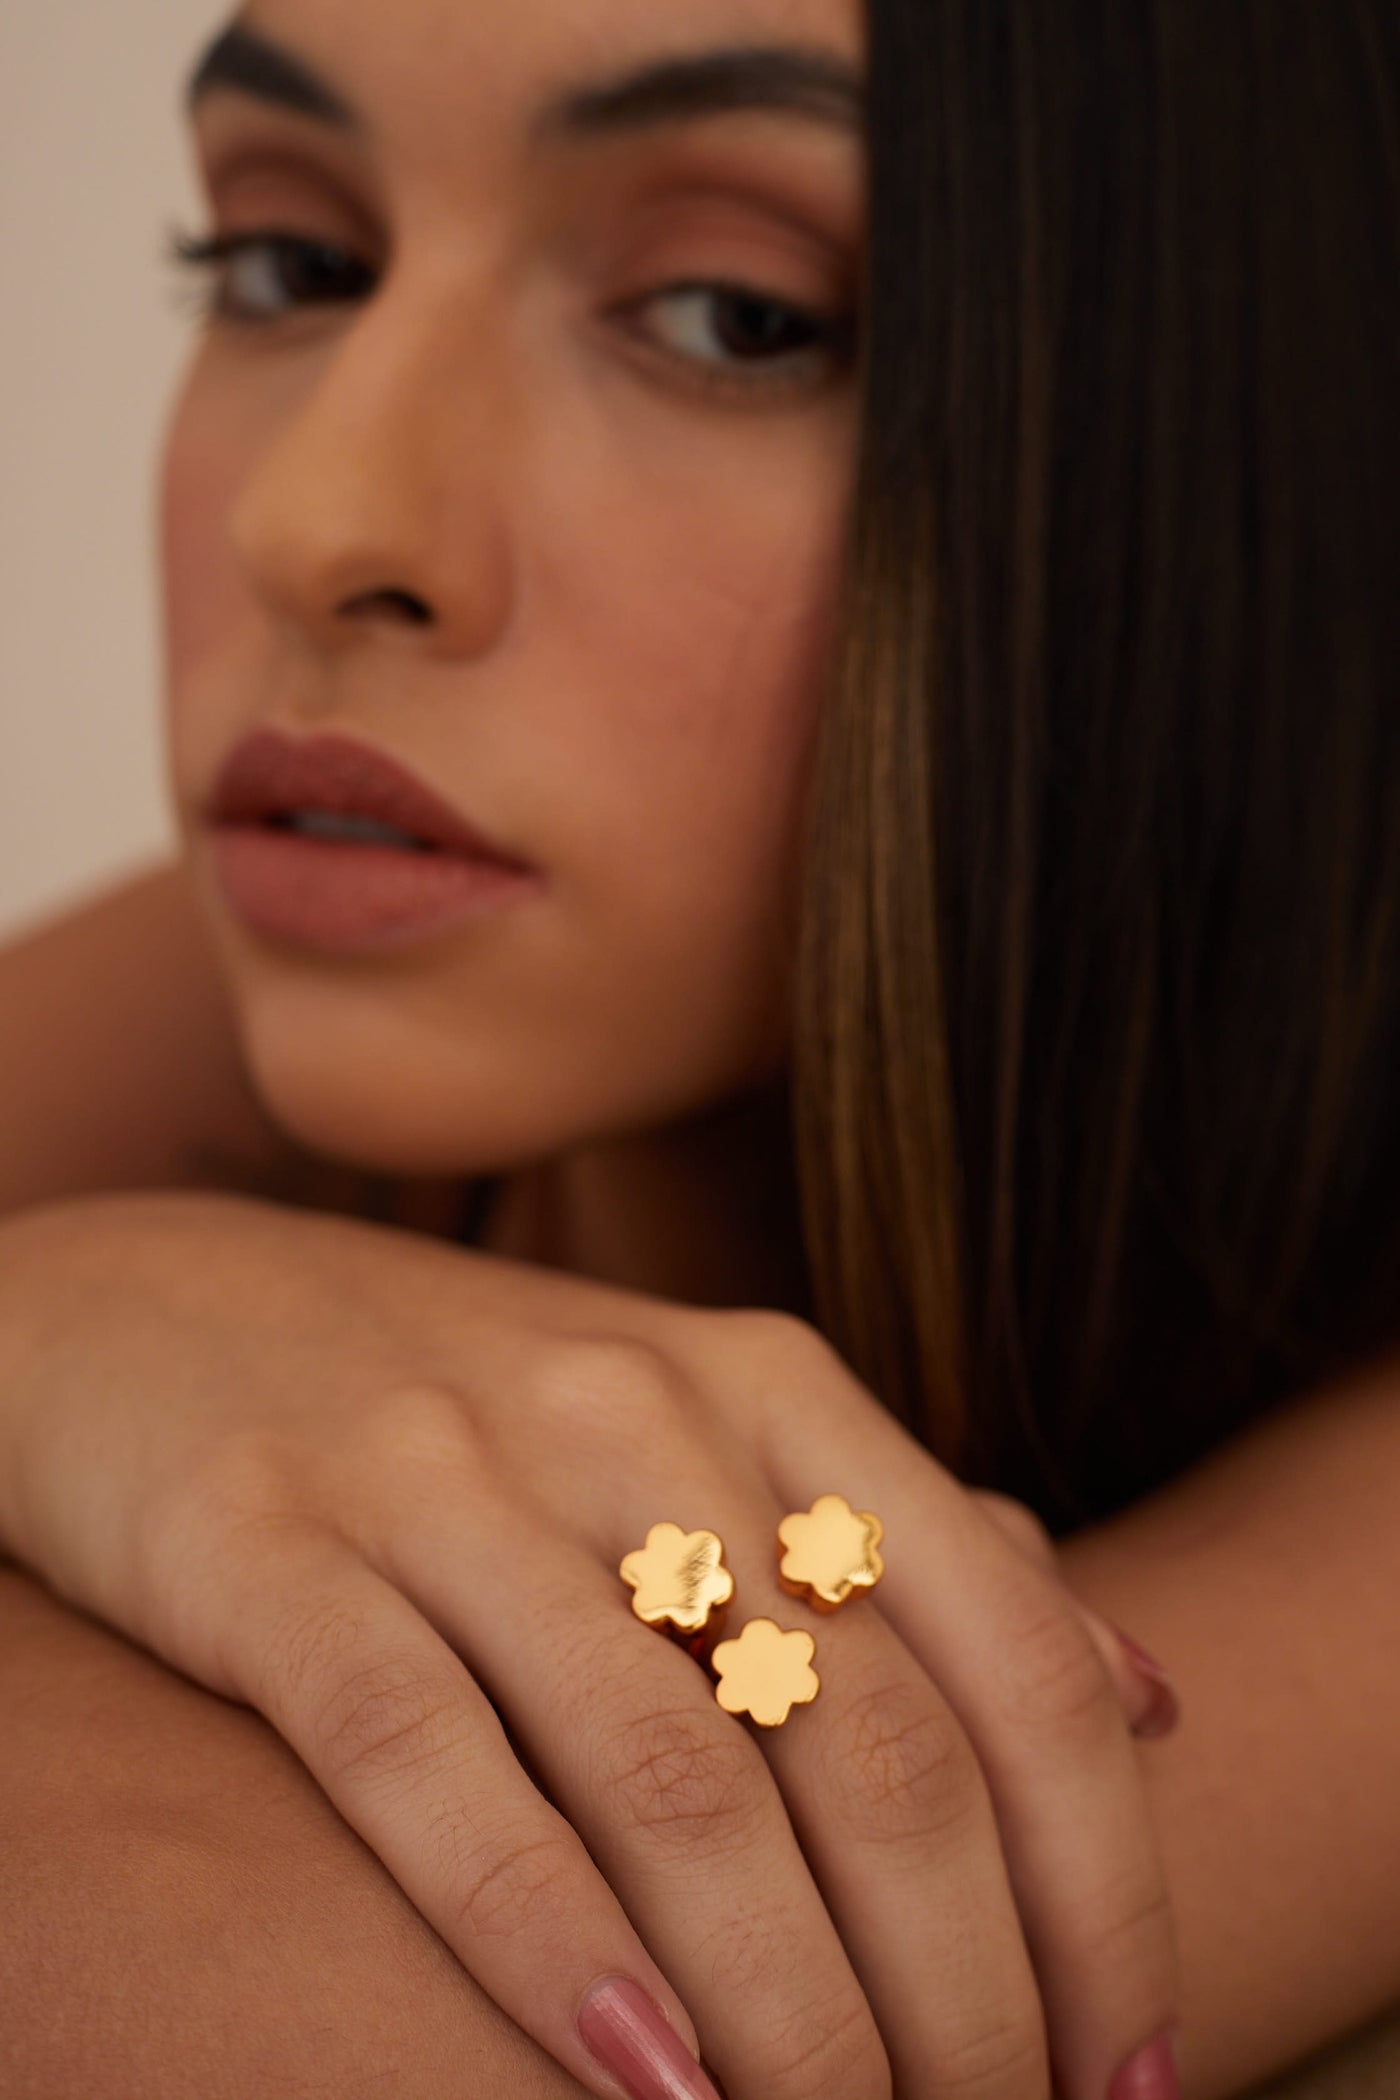 Outhouse jewellery OH Poppi Clump Ring gold online shopping melange singapore indian designer wear